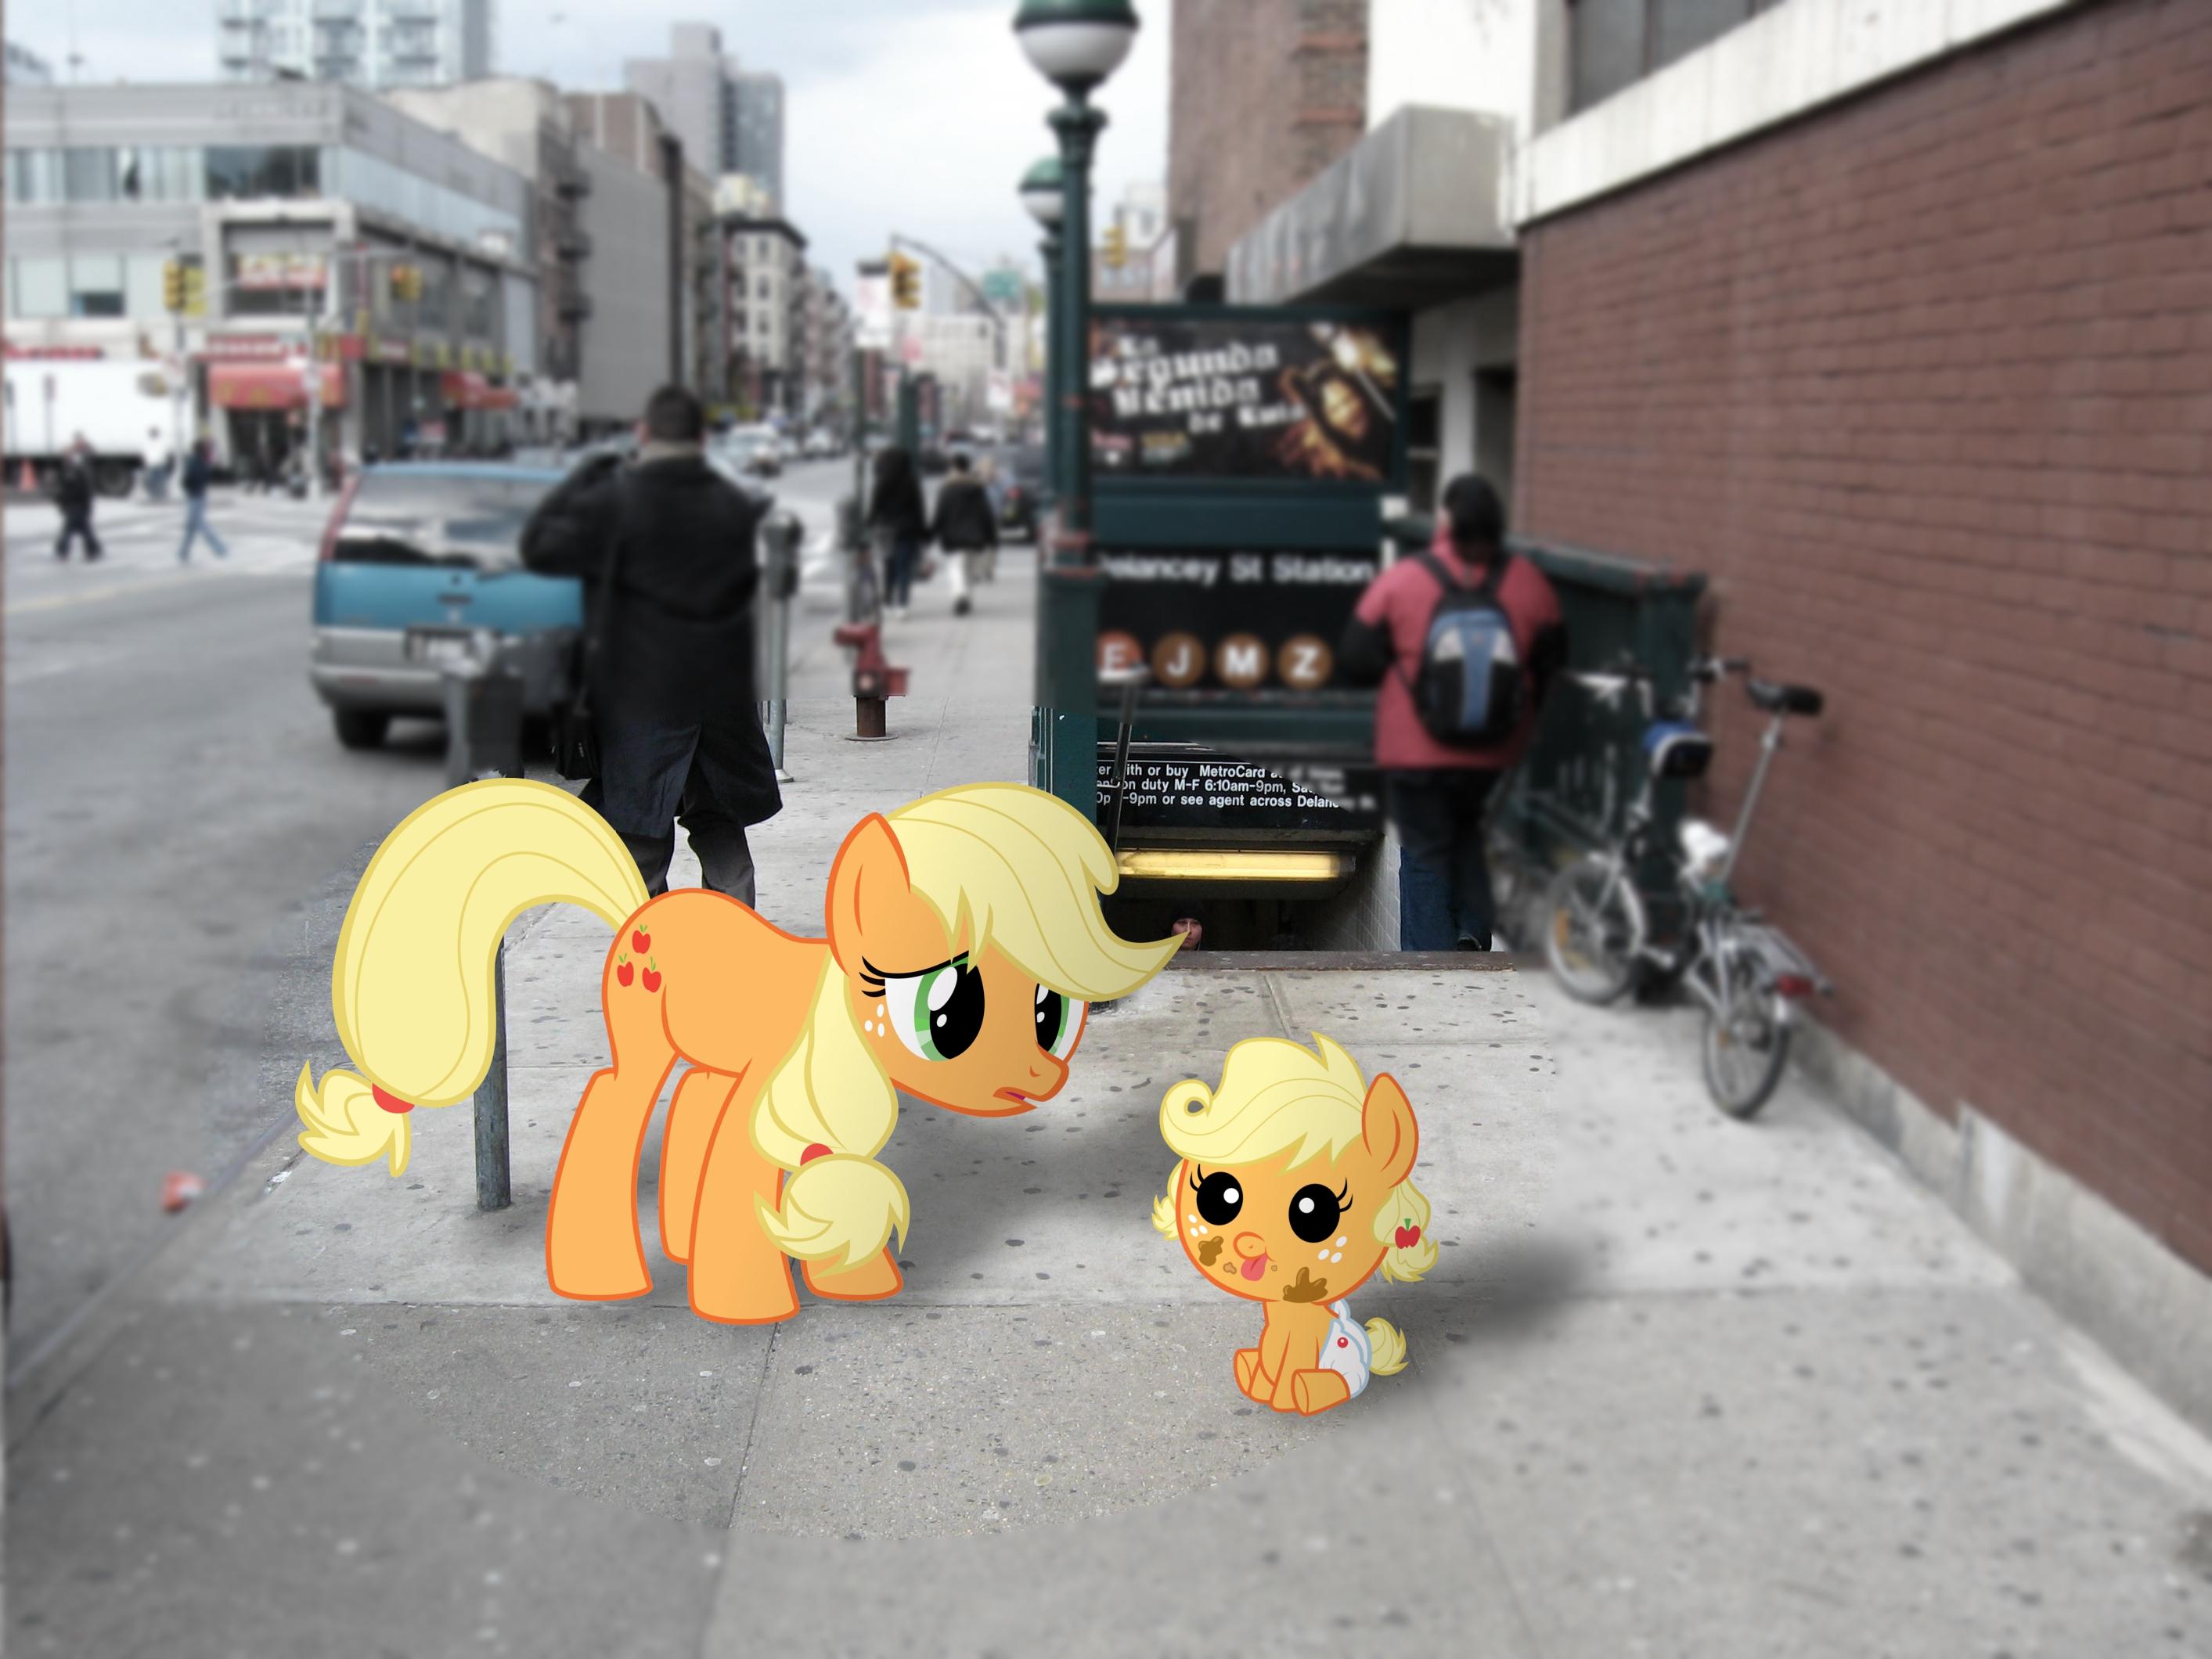 my little pony applejack finds her freinds like her brother